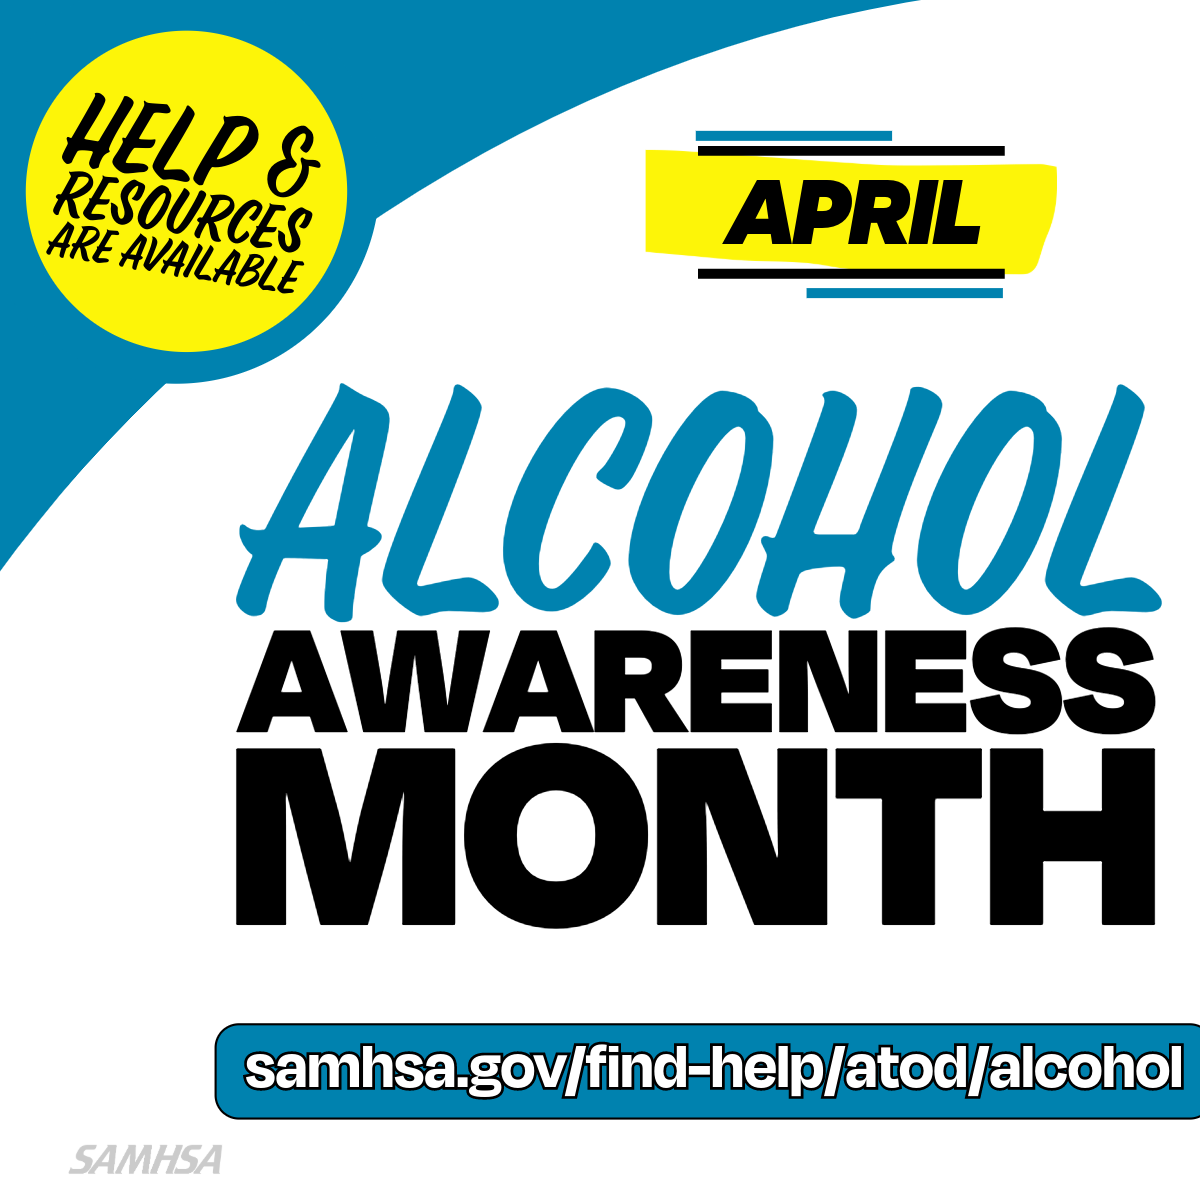 April is #AlcoholAwarenessMonth @SAMHSA—a time to raise awareness of alcohol use & misuse. Visit link in bio for helpful resources on alcohol use & misuse prevention, treatment & recovery support services that you & your community can use to support those who may be struggling.